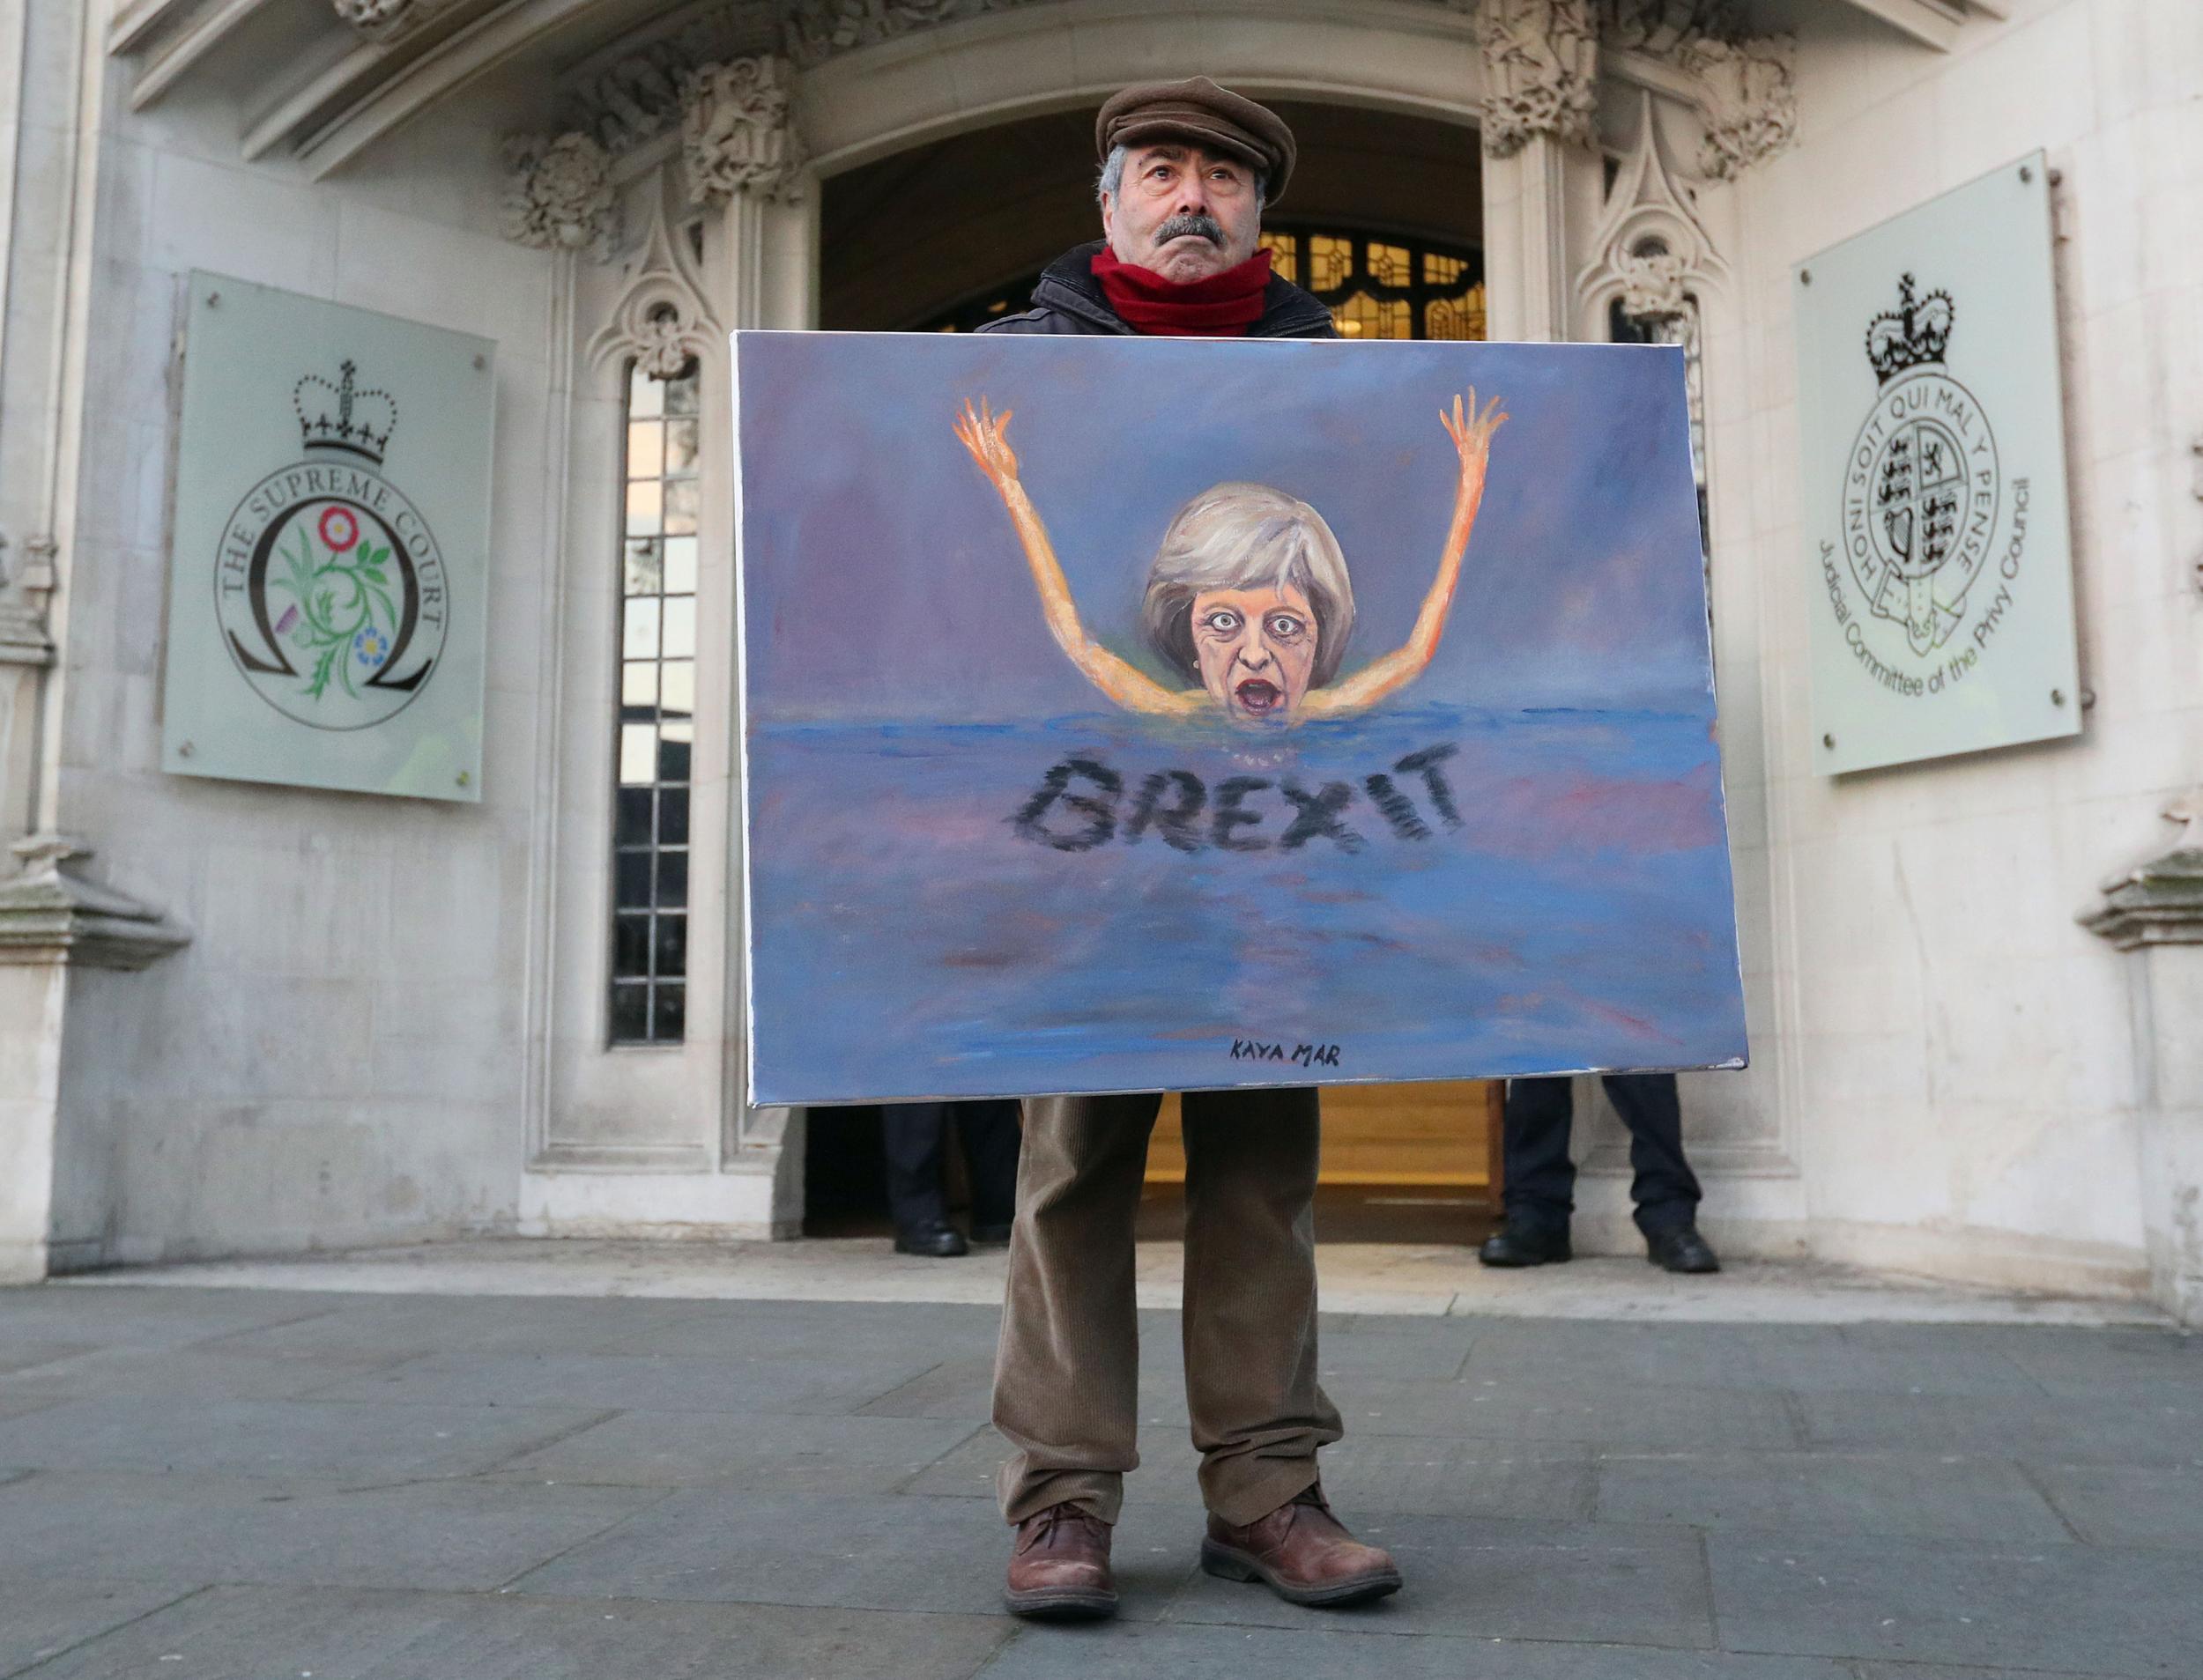 Satirical artist Kaya Mar poses with a Brexit-themed artwork depicting British Prime Minister Theresa May, as he stands outside the Supreme Court in London in January